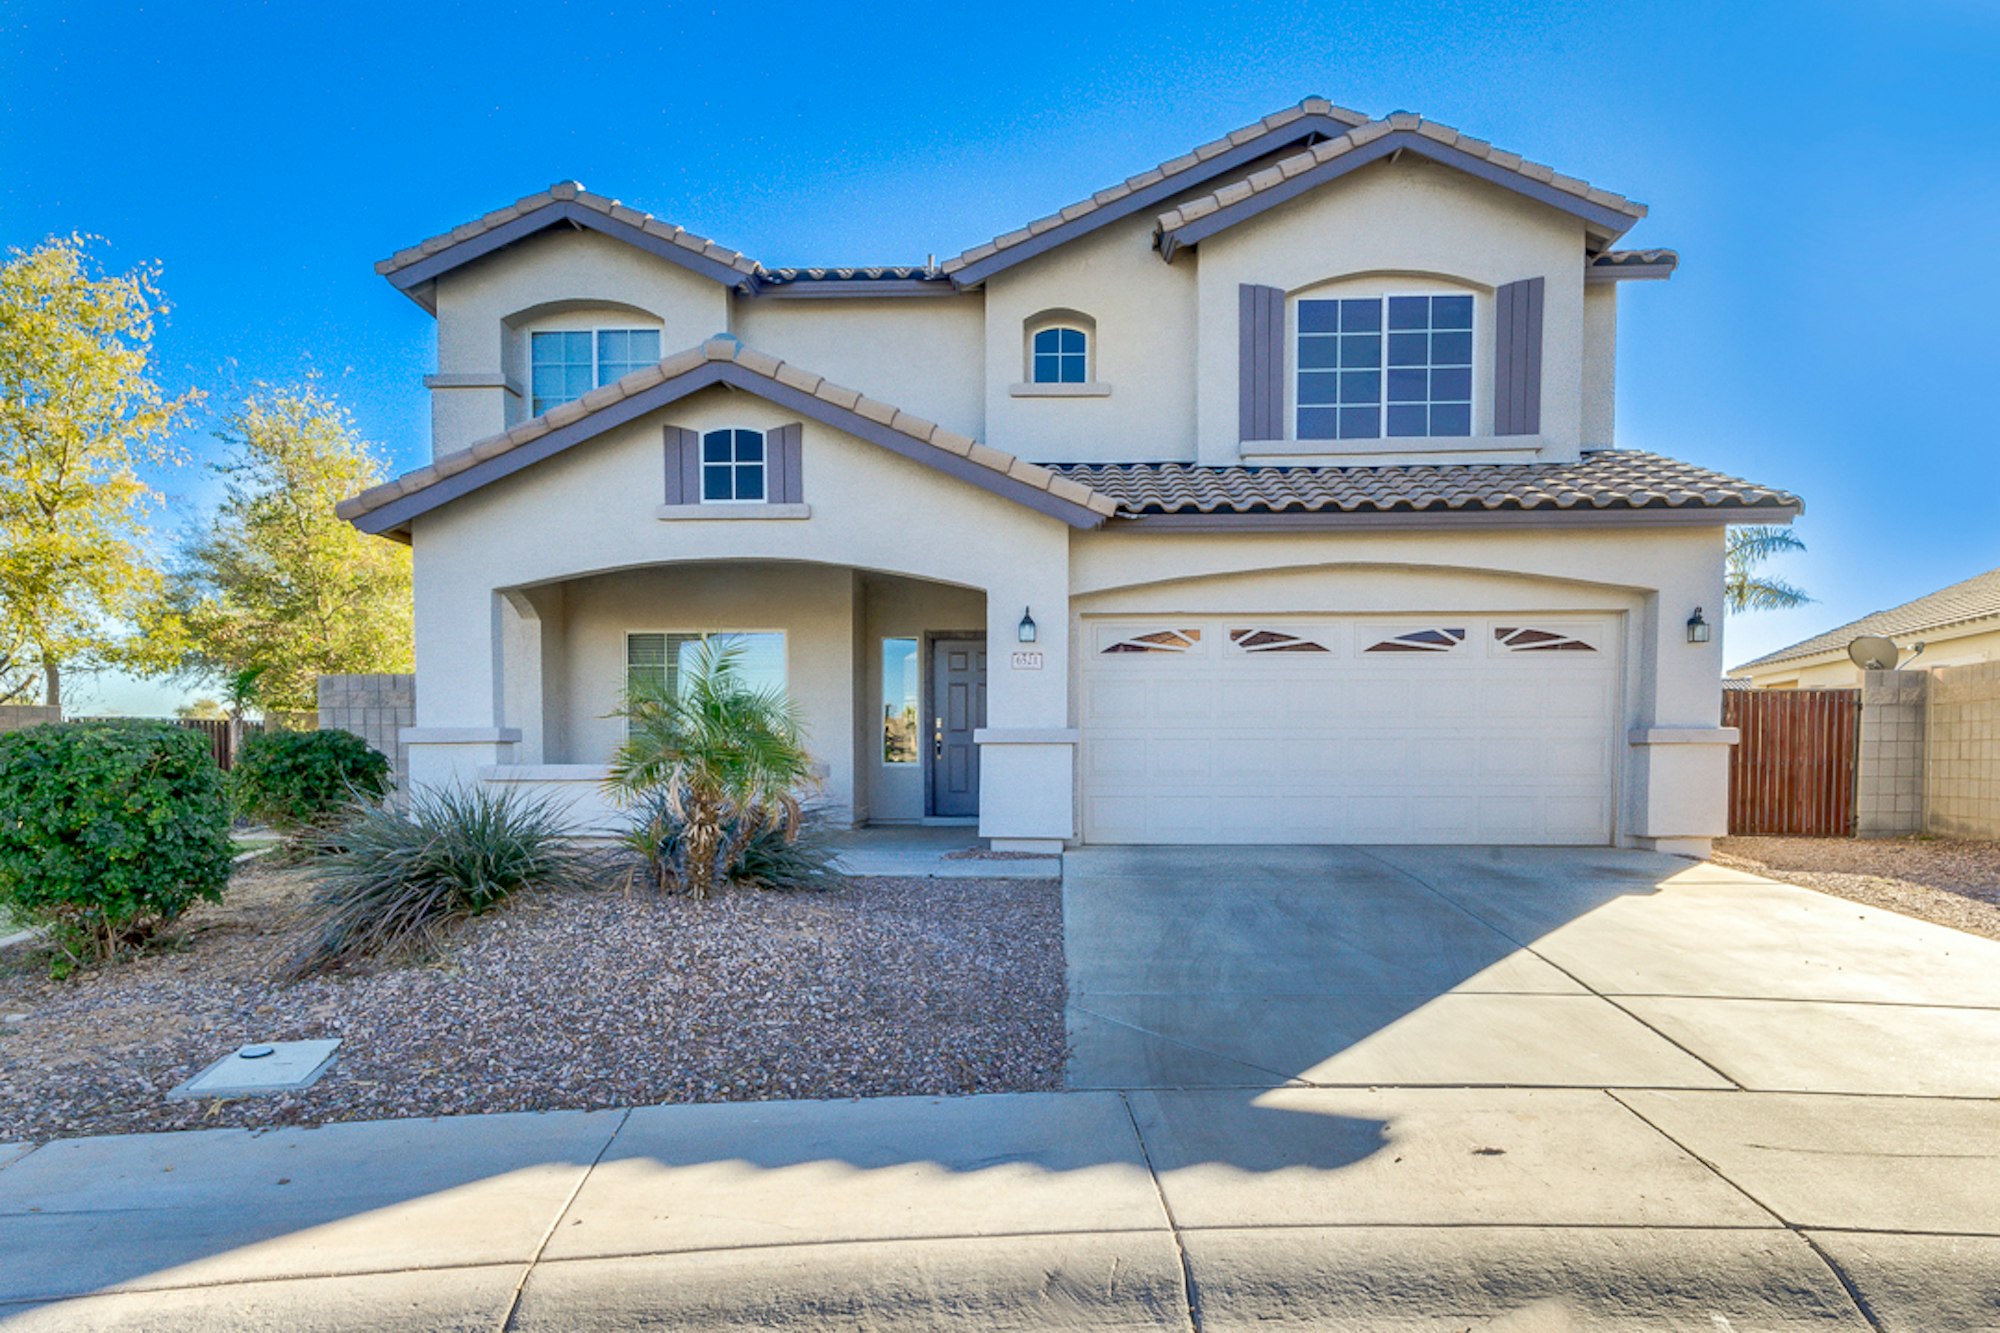 Photo 1 of 34 - 6521 S Silver Dr, Chandler, AZ 85249